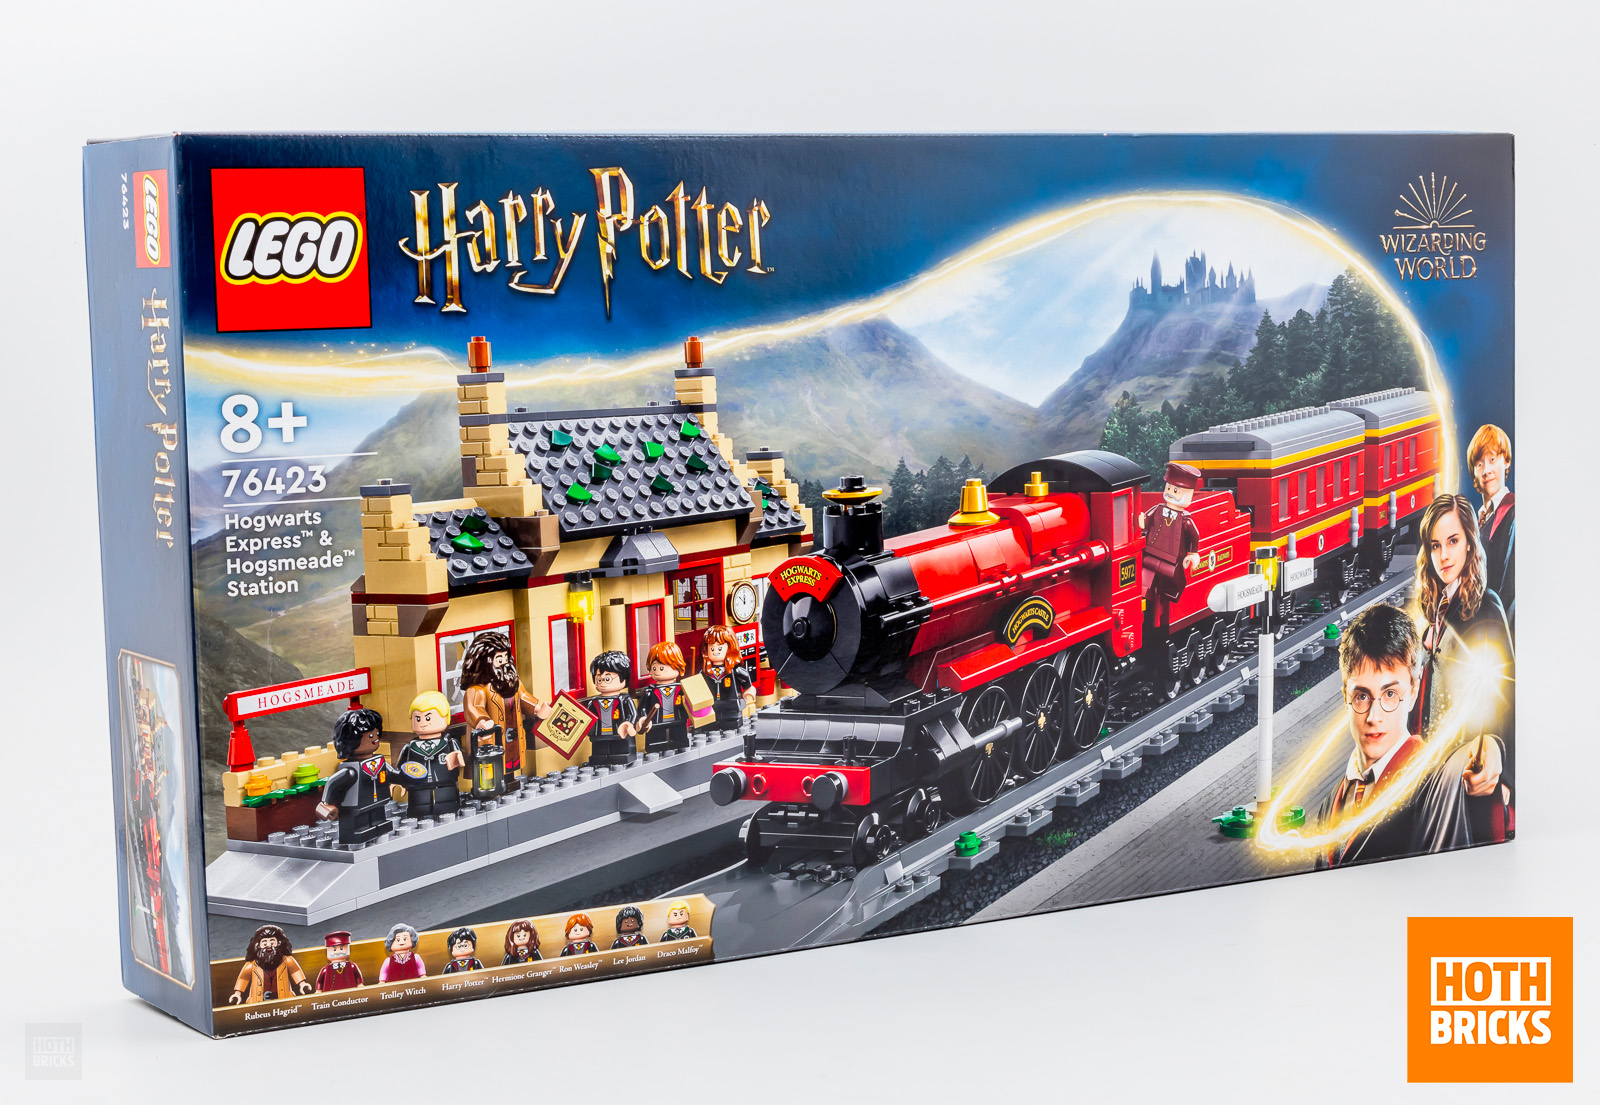 ▻ Contest: A copy of the LEGO Harry Potter 76423 Hogwarts Express Train with Hogsmeade Station to be HOTH